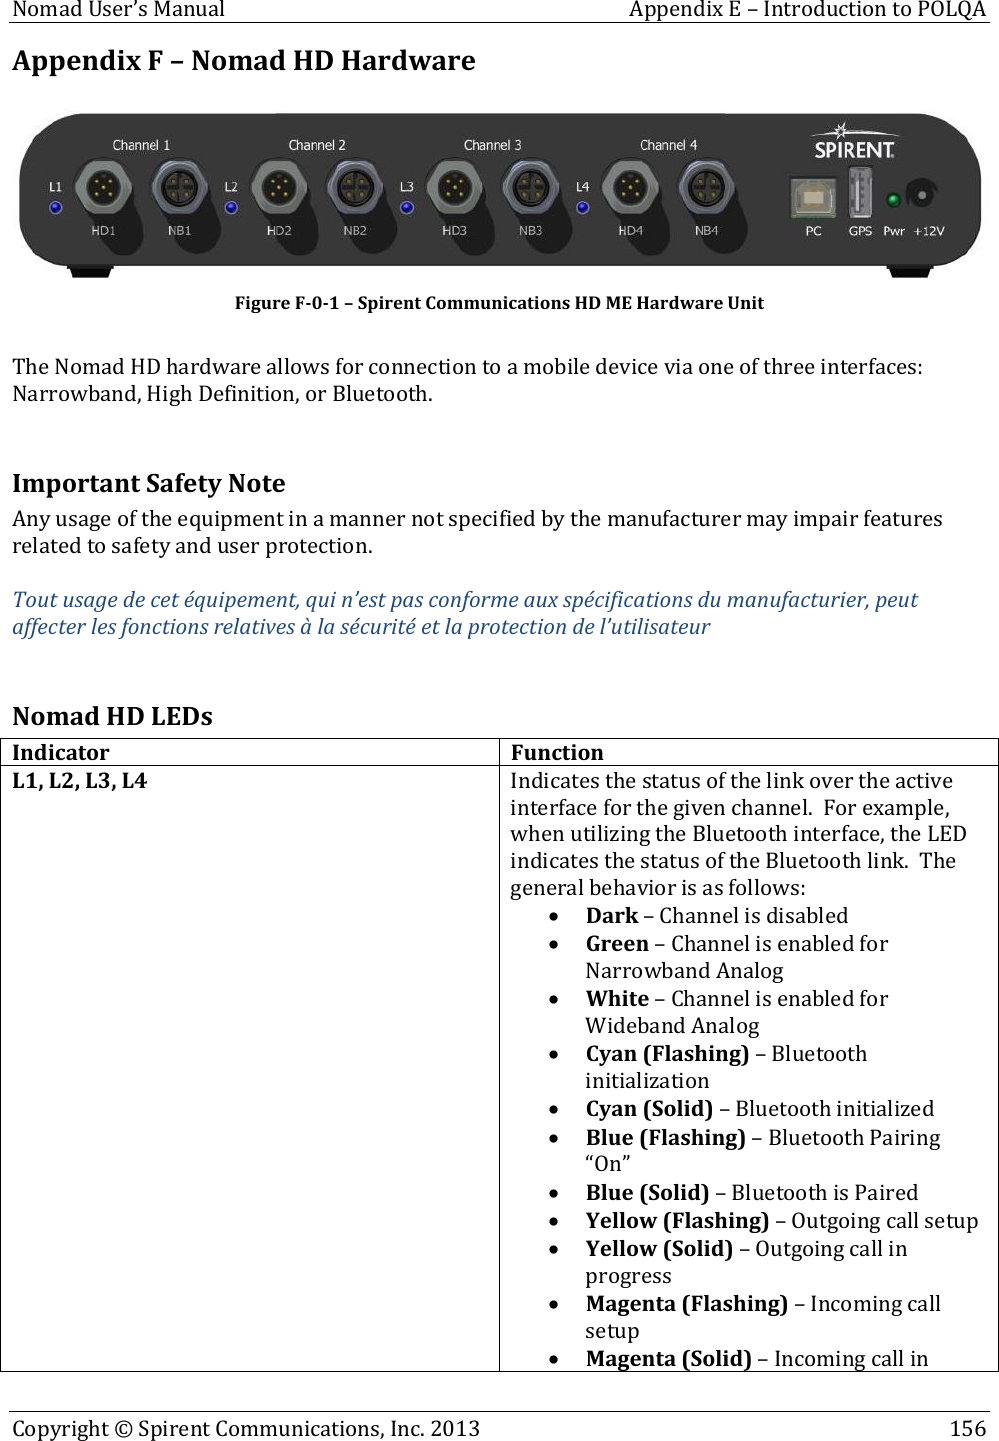  Nomad User’s Manual  Appendix E – Introduction to POLQA Copyright © Spirent Communications, Inc. 2013    156  Appendix F – Nomad HD Hardware   Figure F-0-1 – Spirent Communications HD ME Hardware Unit  The Nomad HD hardware allows for connection to a mobile device via one of three interfaces:  Narrowband, High Definition, or Bluetooth.    Important Safety Note Any usage of the equipment in a manner not specified by the manufacturer may impair features related to safety and user protection.  Tout usage de cet équipement, qui n’est pas conforme aux spécifications du manufacturier, peut affecter les fonctions relatives à la sécurité et la protection de l’utilisateur  Nomad HD LEDs Indicator Function L1, L2, L3, L4 Indicates the status of the link over the active interface for the given channel.  For example, when utilizing the Bluetooth interface, the LED indicates the status of the Bluetooth link.  The general behavior is as follows:  Dark – Channel is disabled  Green – Channel is enabled for Narrowband Analog  White – Channel is enabled for Wideband Analog  Cyan (Flashing) – Bluetooth initialization  Cyan (Solid) – Bluetooth initialized  Blue (Flashing) – Bluetooth Pairing “On”  Blue (Solid) – Bluetooth is Paired  Yellow (Flashing) – Outgoing call setup  Yellow (Solid) – Outgoing call in progress  Magenta (Flashing) – Incoming call setup  Magenta (Solid) – Incoming call in 